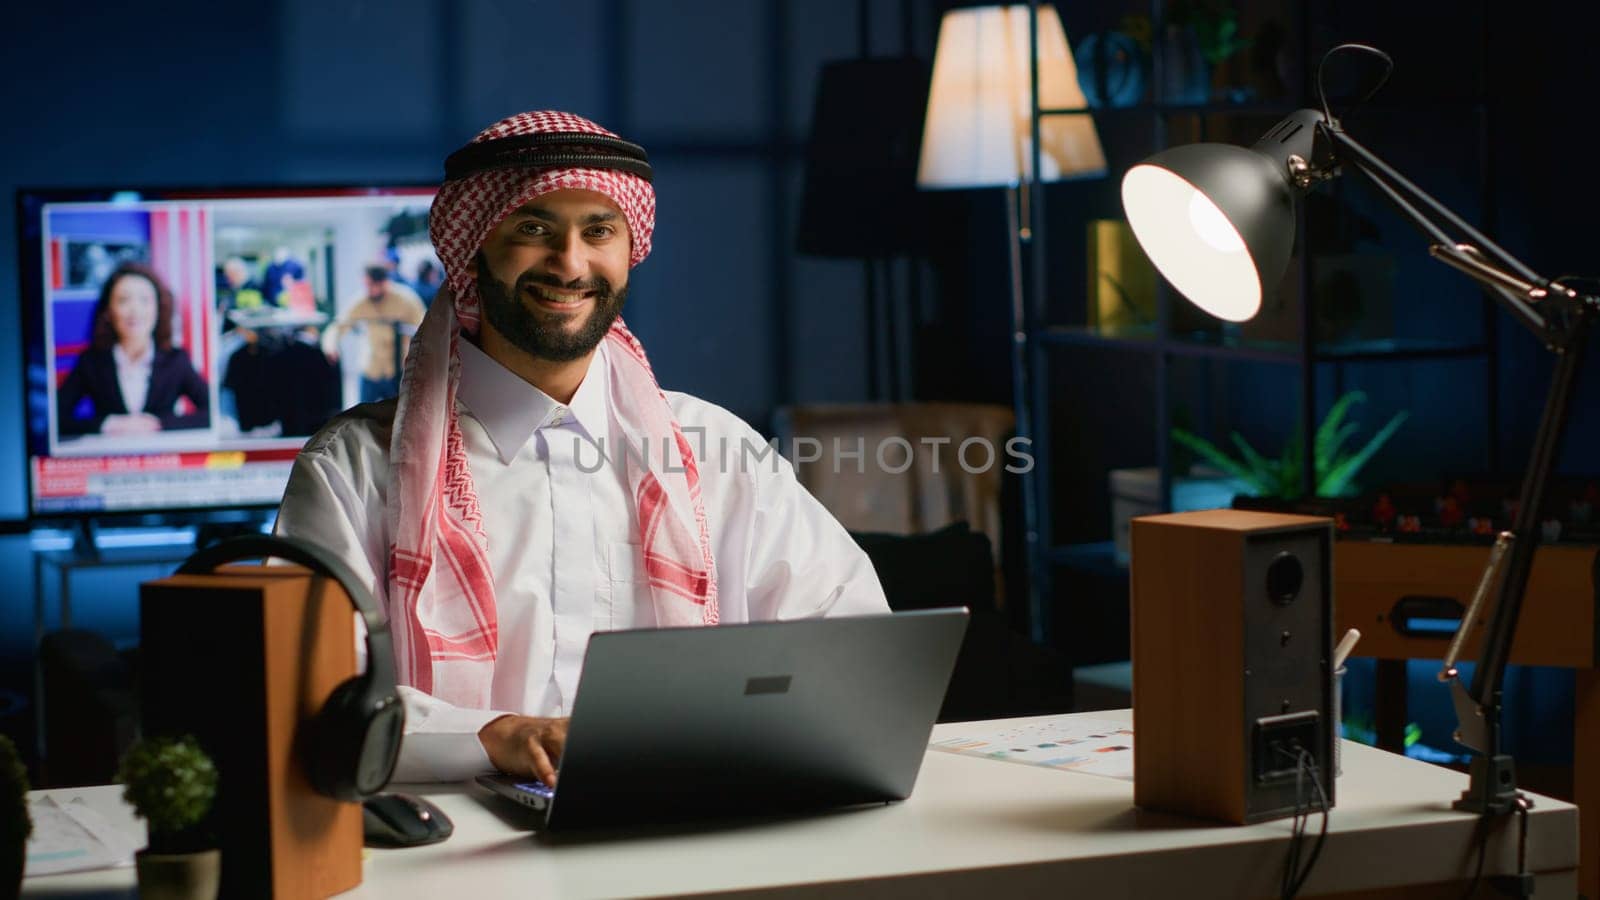 Portrait of happy Arab freelancer solving tasks while working from home, typing on laptop keyboard. Middle eastern man browsing on digital device, reading emails from clients in office setting